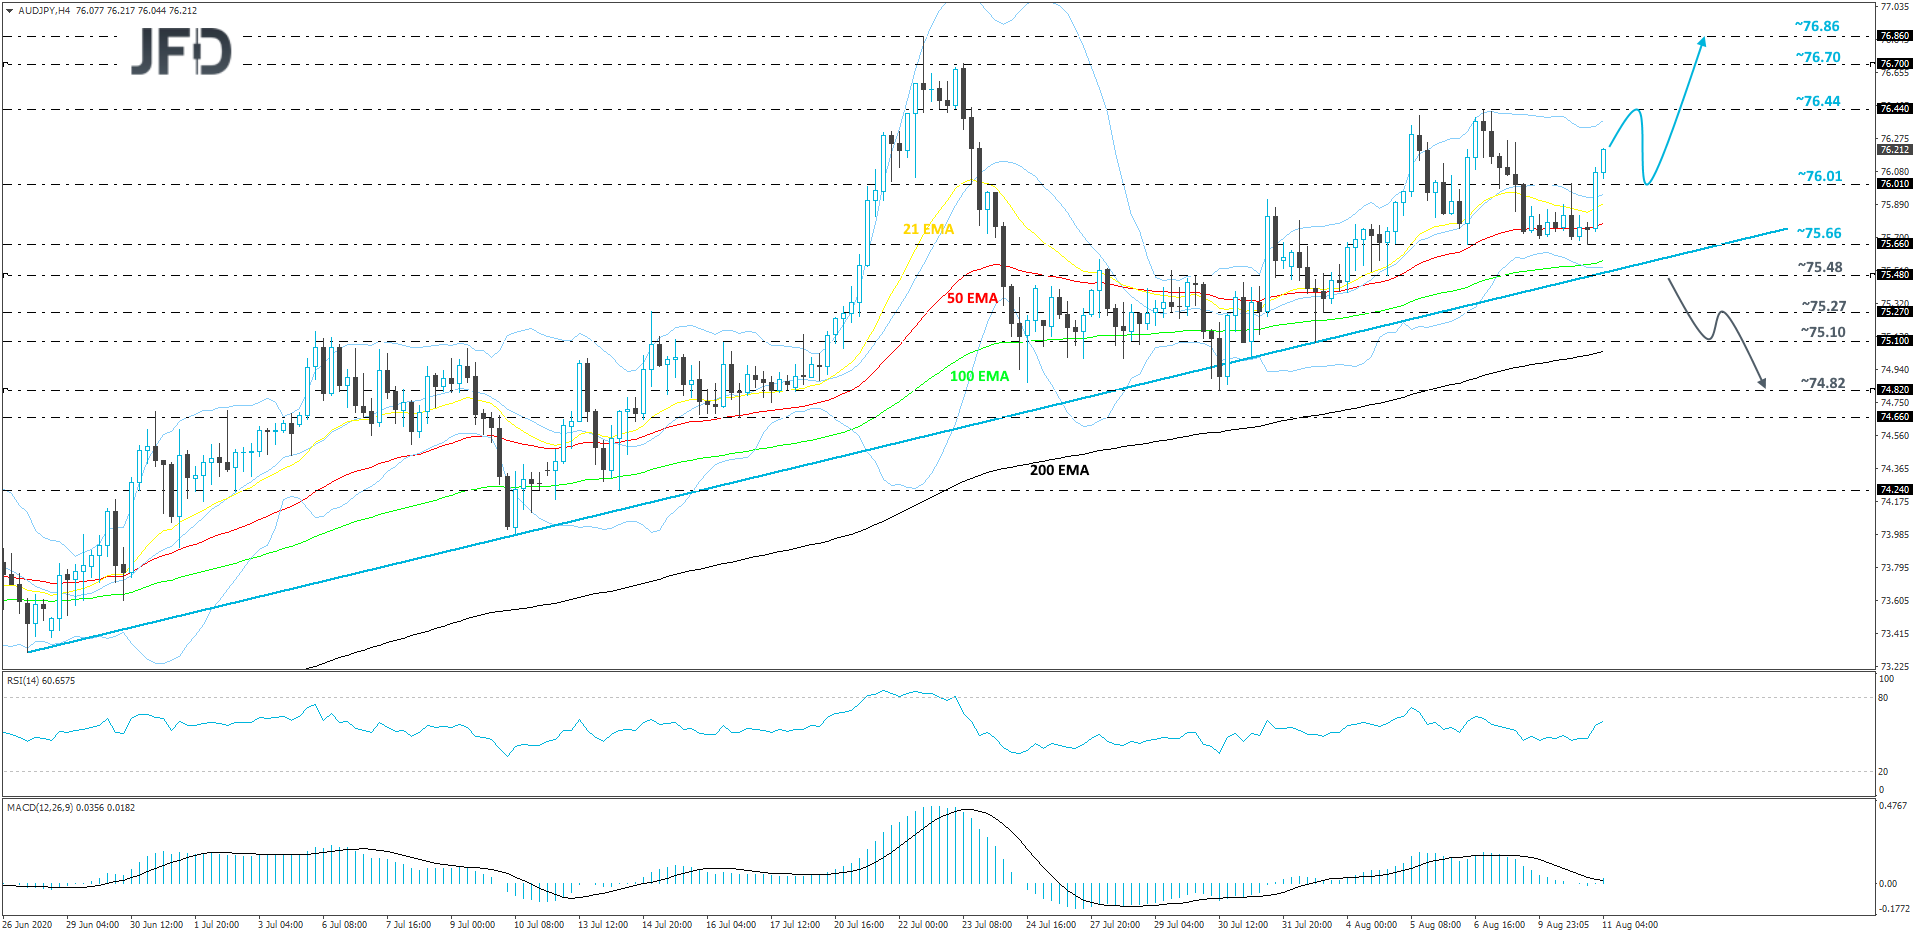 AUD/JPY 4-hour chart technical analysis